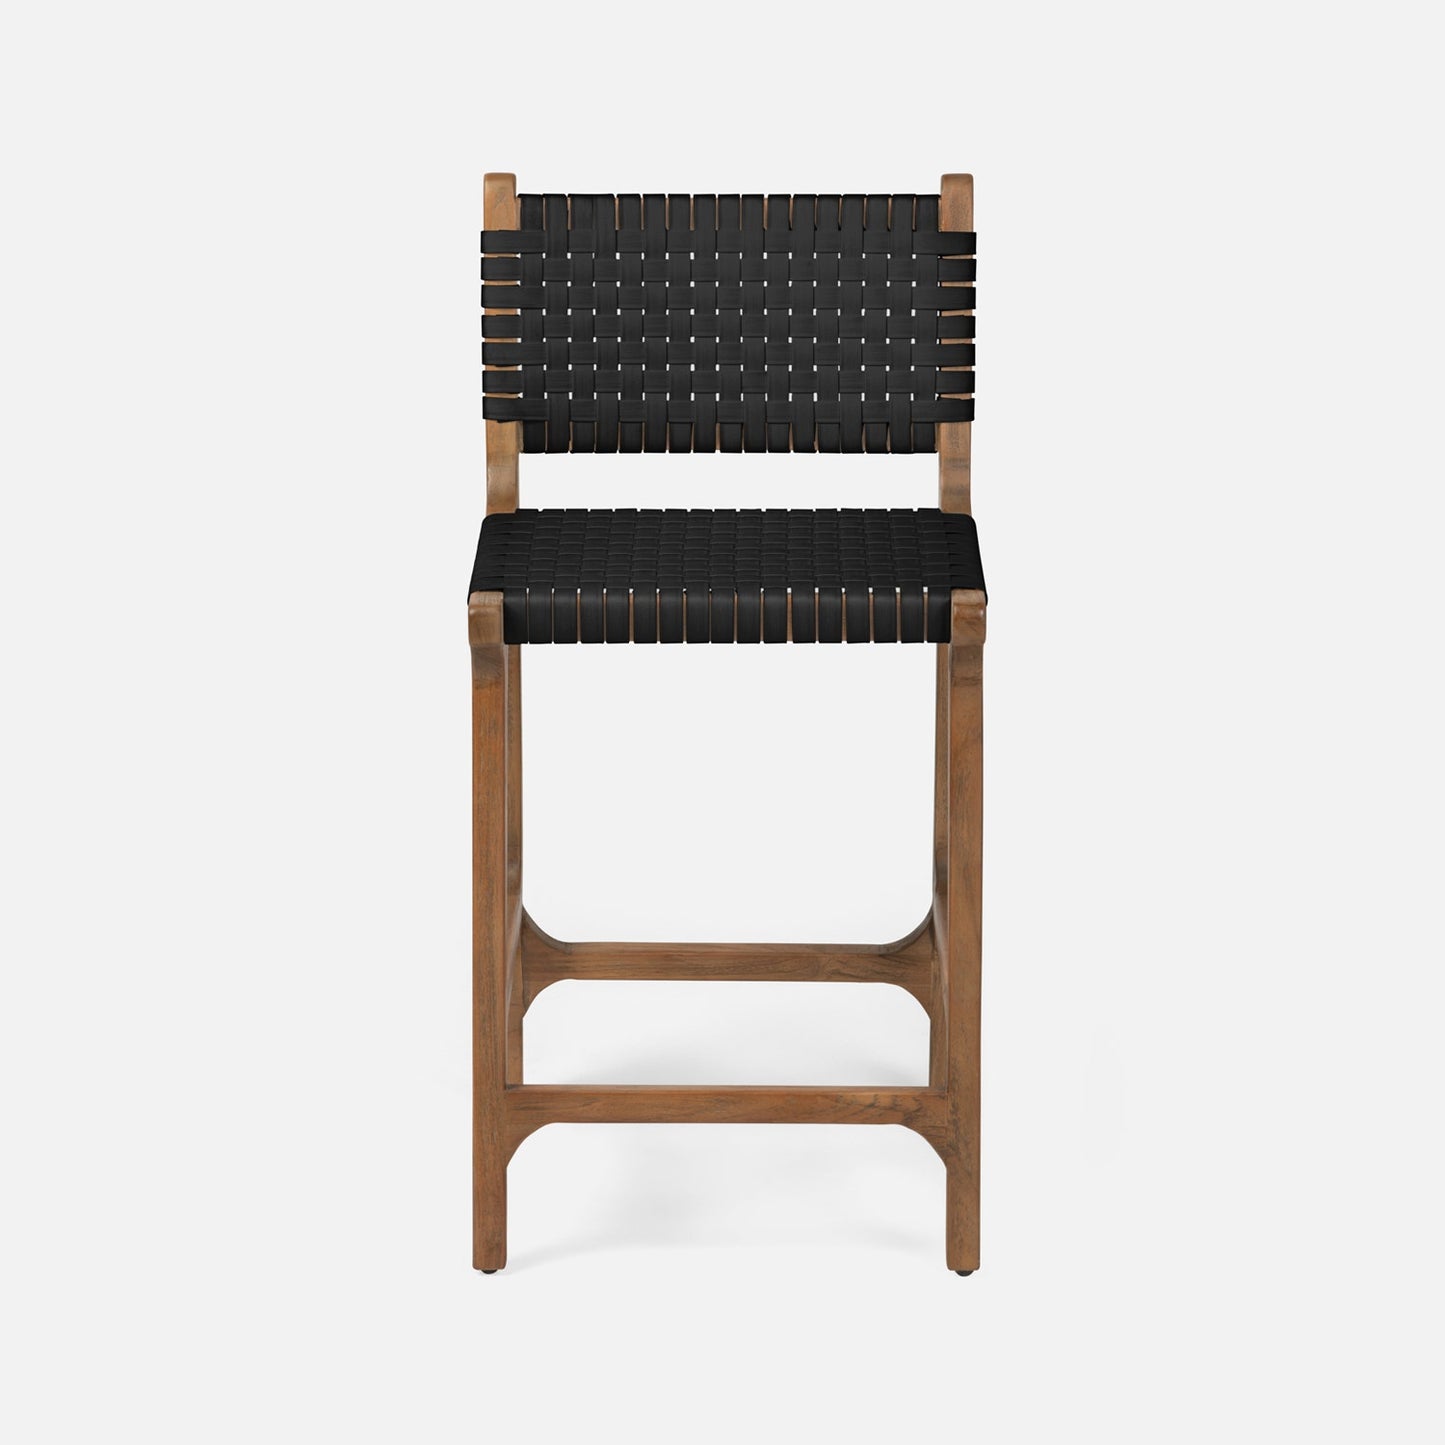 Rawley Bar and Counter Stool Black and Natural Teak - multiple options